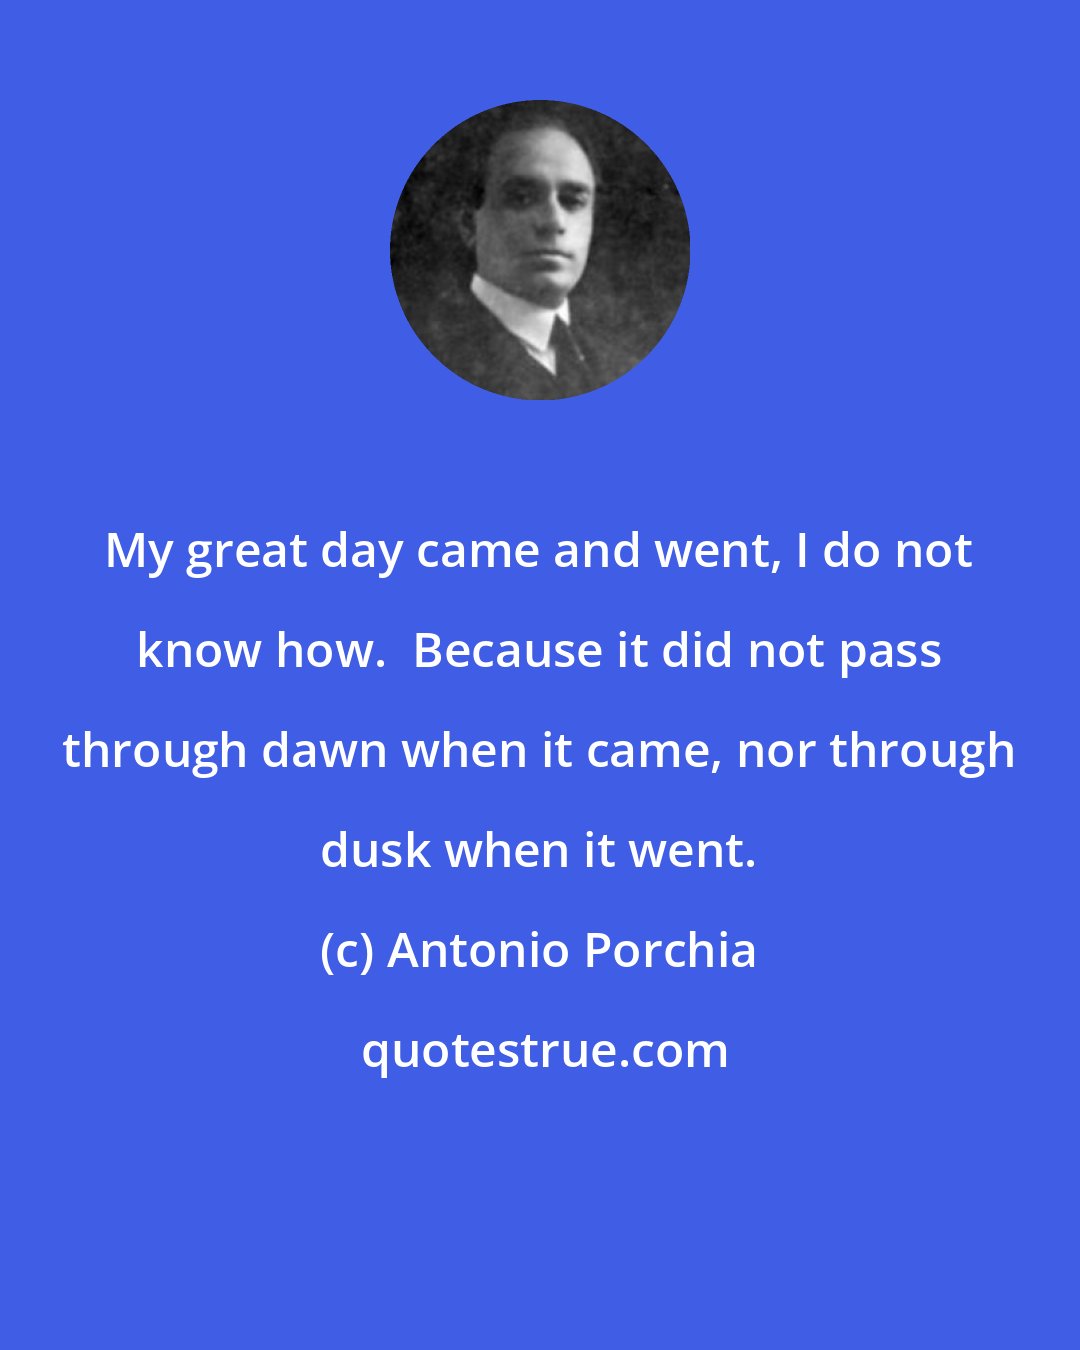 Antonio Porchia: My great day came and went, I do not know how.  Because it did not pass through dawn when it came, nor through dusk when it went.